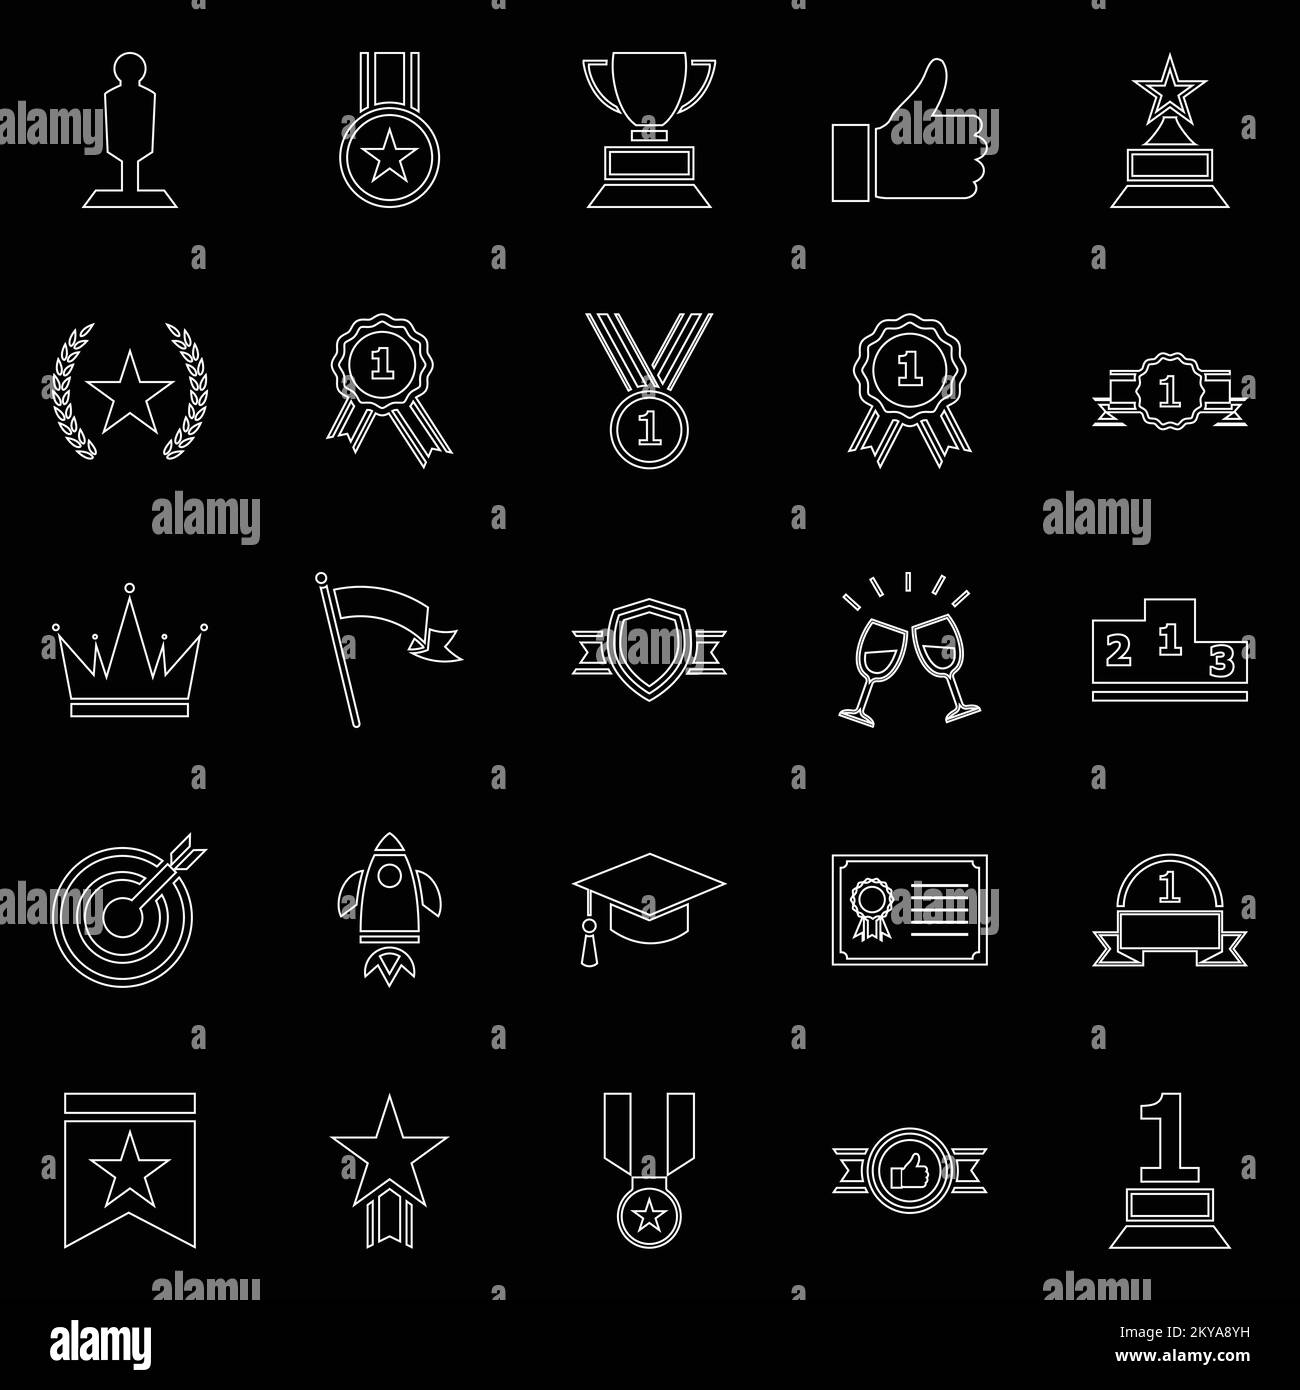 Success line icons on black background, stock vector Stock Vector